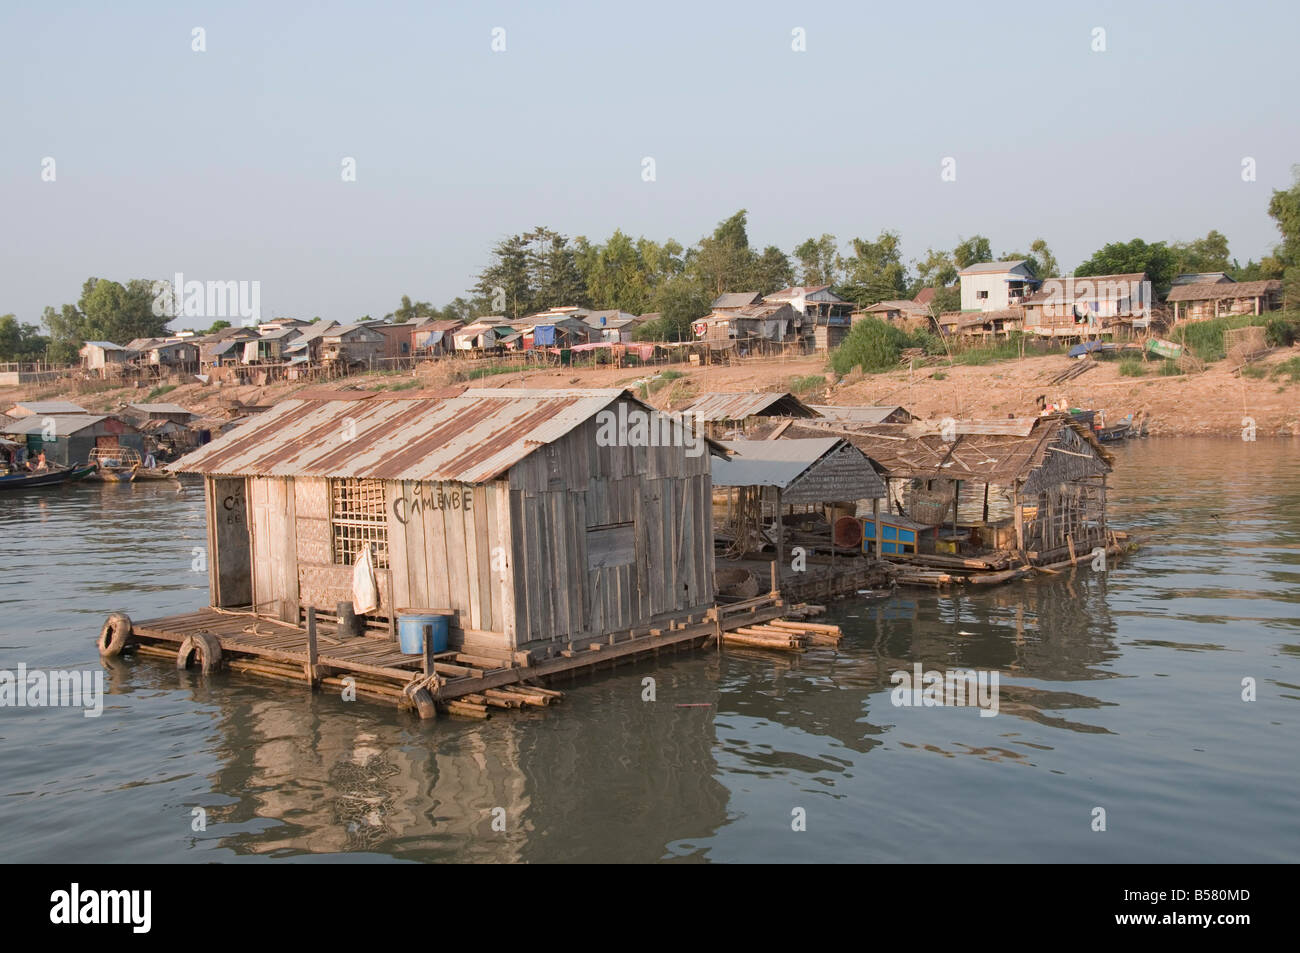 Fishermen's floating house on the Mekong River, Phnom Penh, Cambodia, Indochina, Southeast Asia, Asia Stock Photo